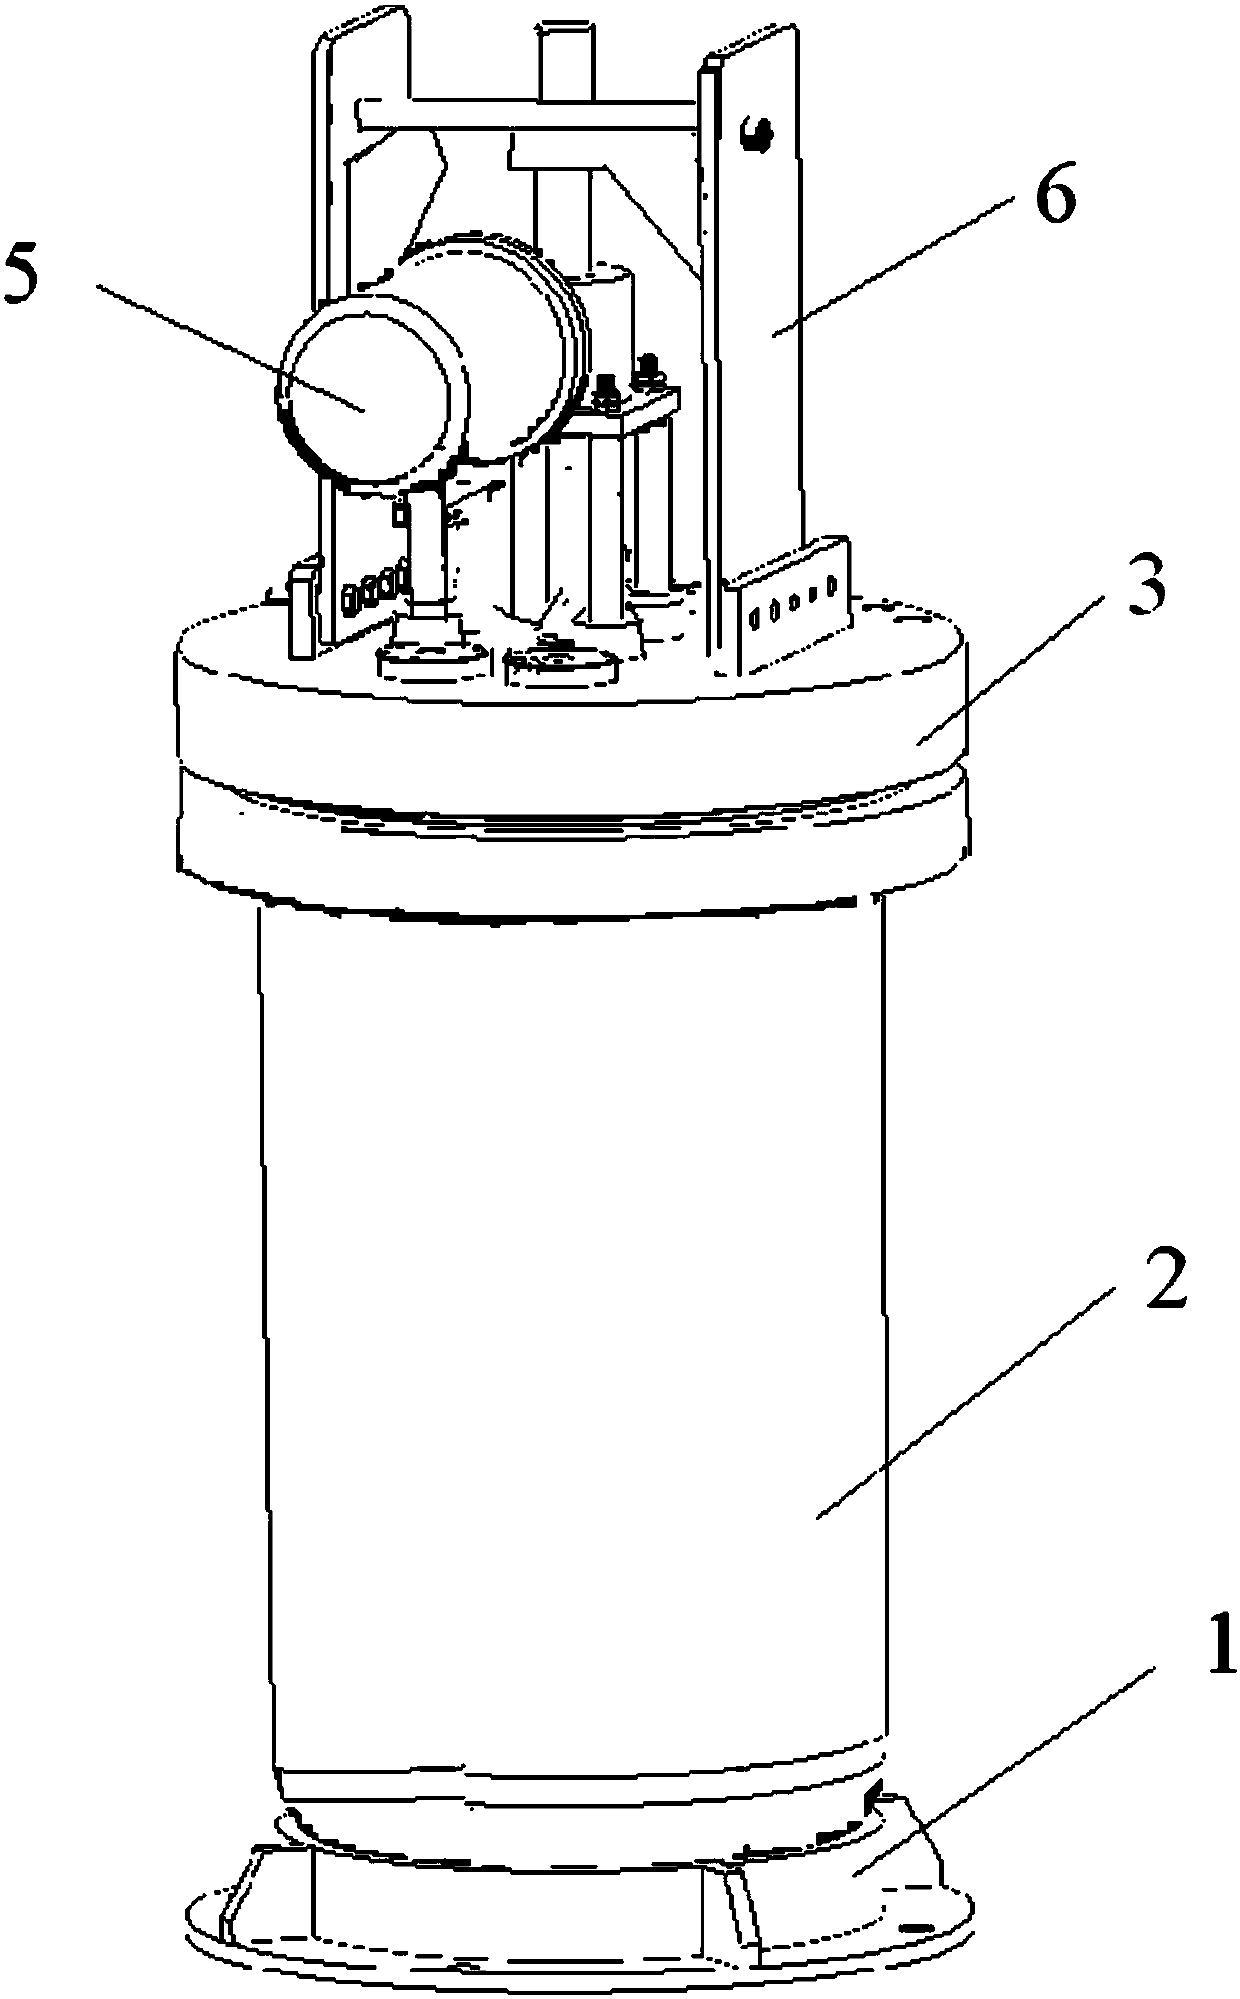 Pressure tank for testing performance of underwater connector